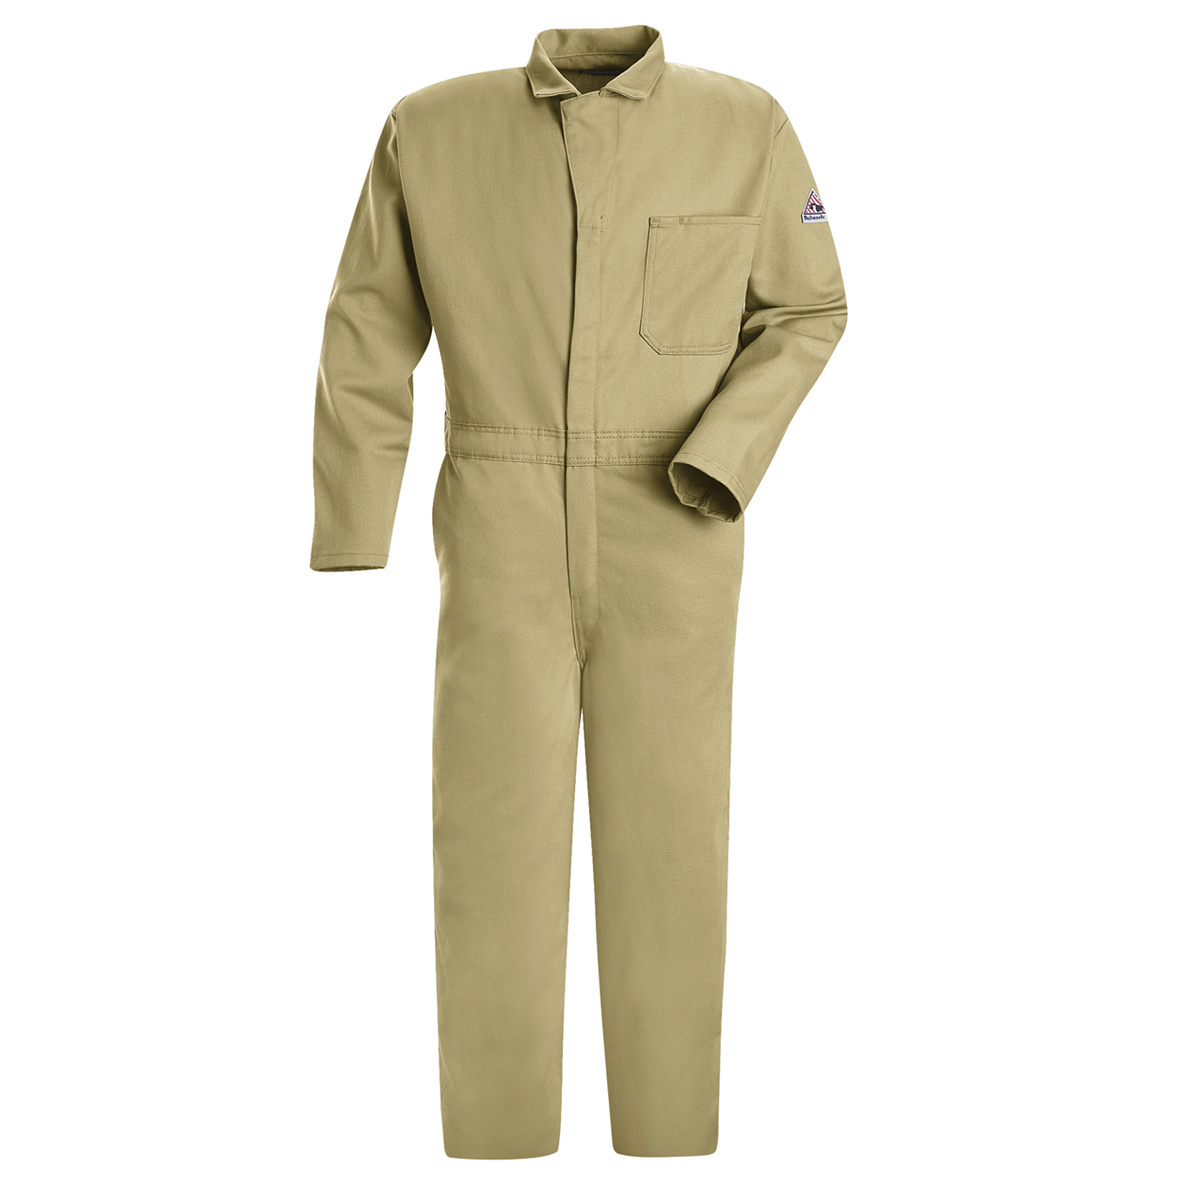 Bulwark® 42 Regular Khaki EXCEL FR® Twill Cotton Flame Resistant Coveralls With Zipper Front Closure